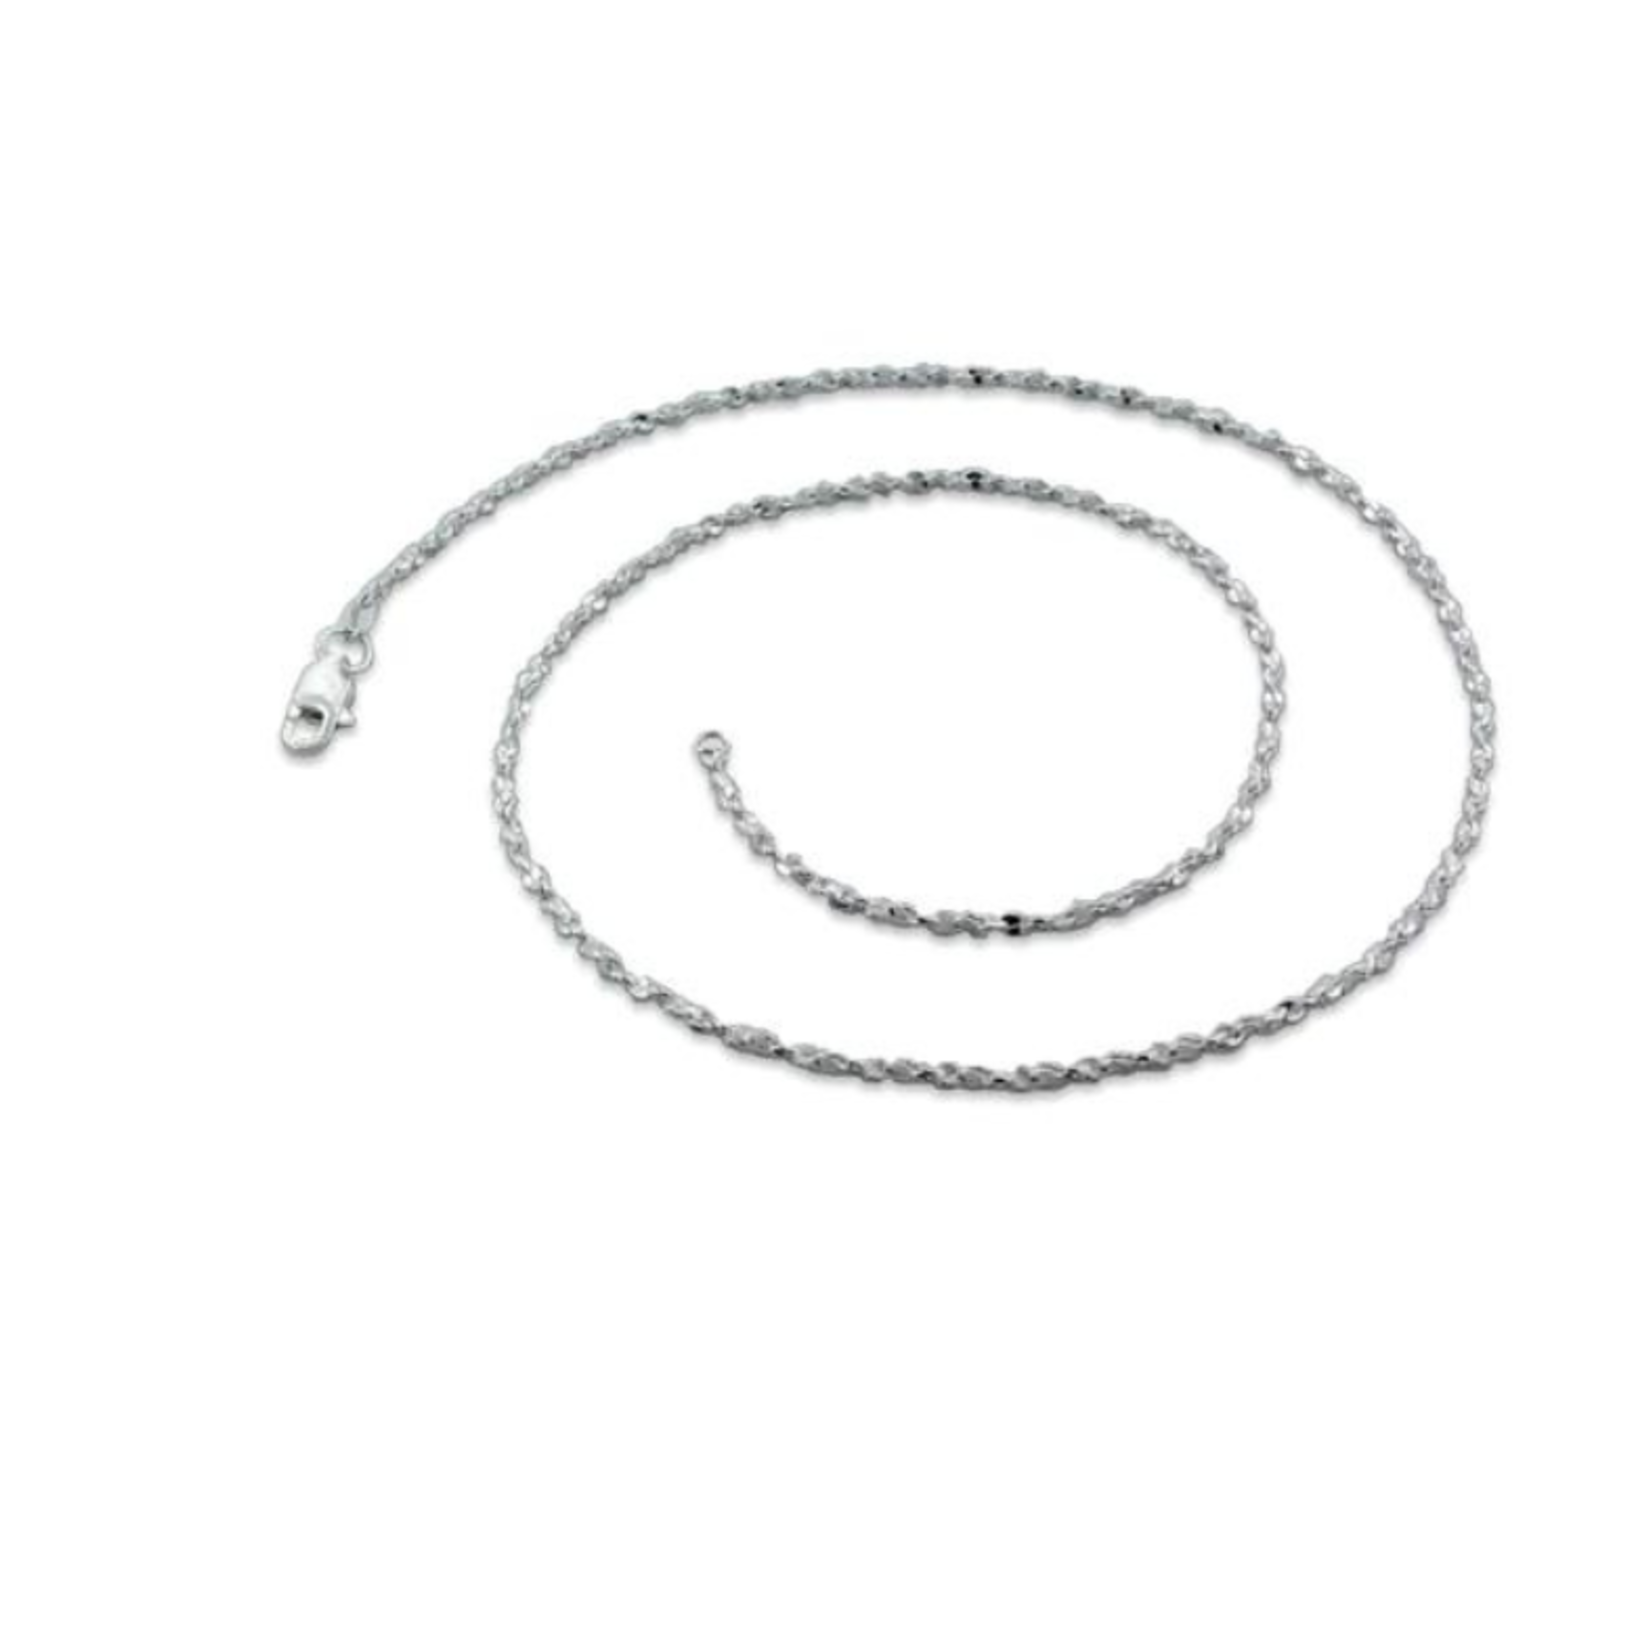 Silver Sterling Silver Twisted Serpentine Chain